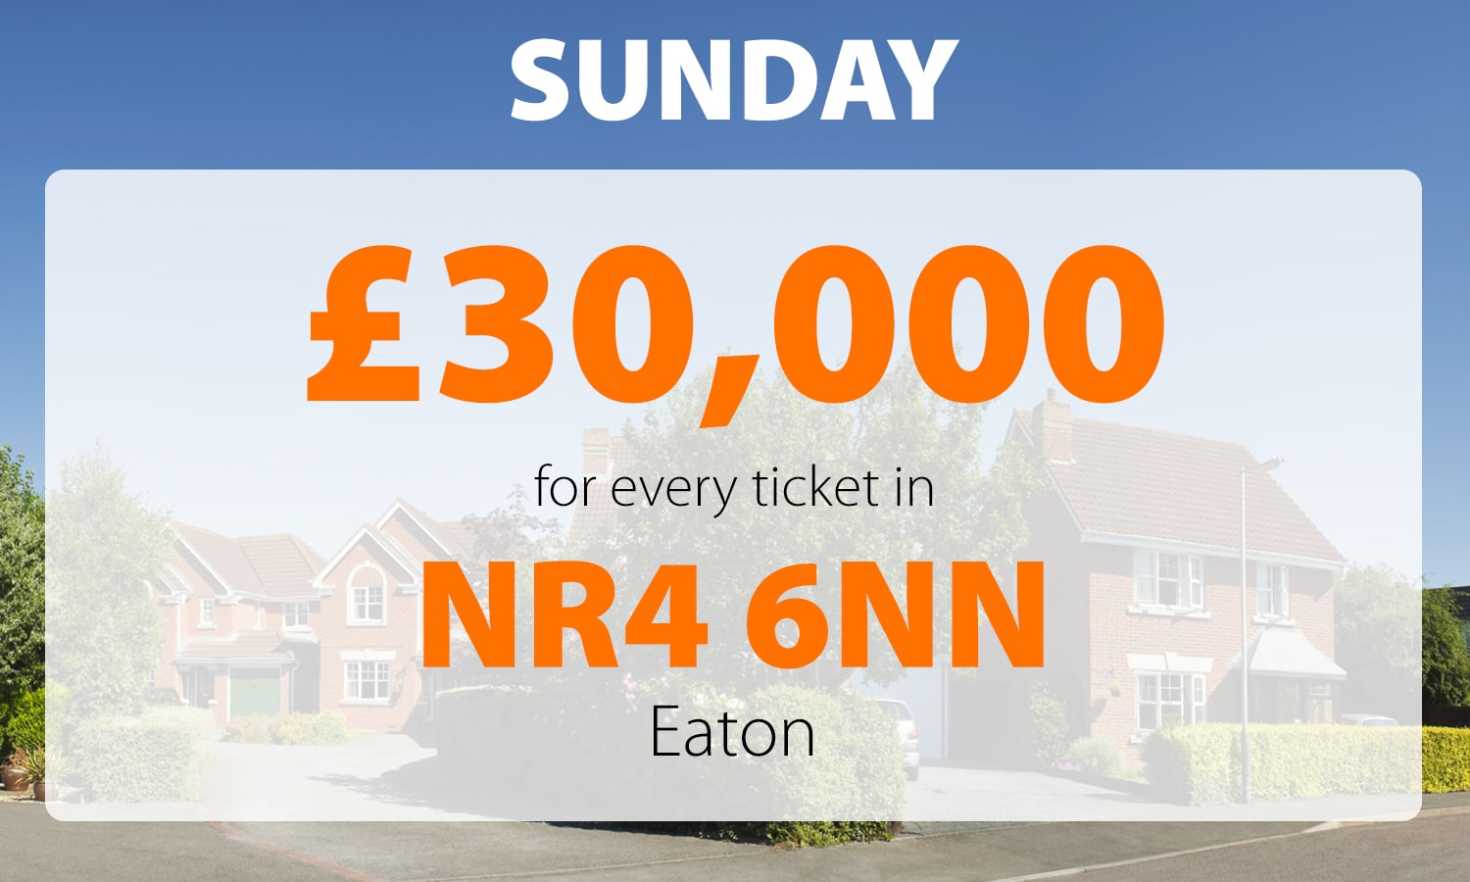 One lucky Eaton player has scooped a whopping £30,000 prize